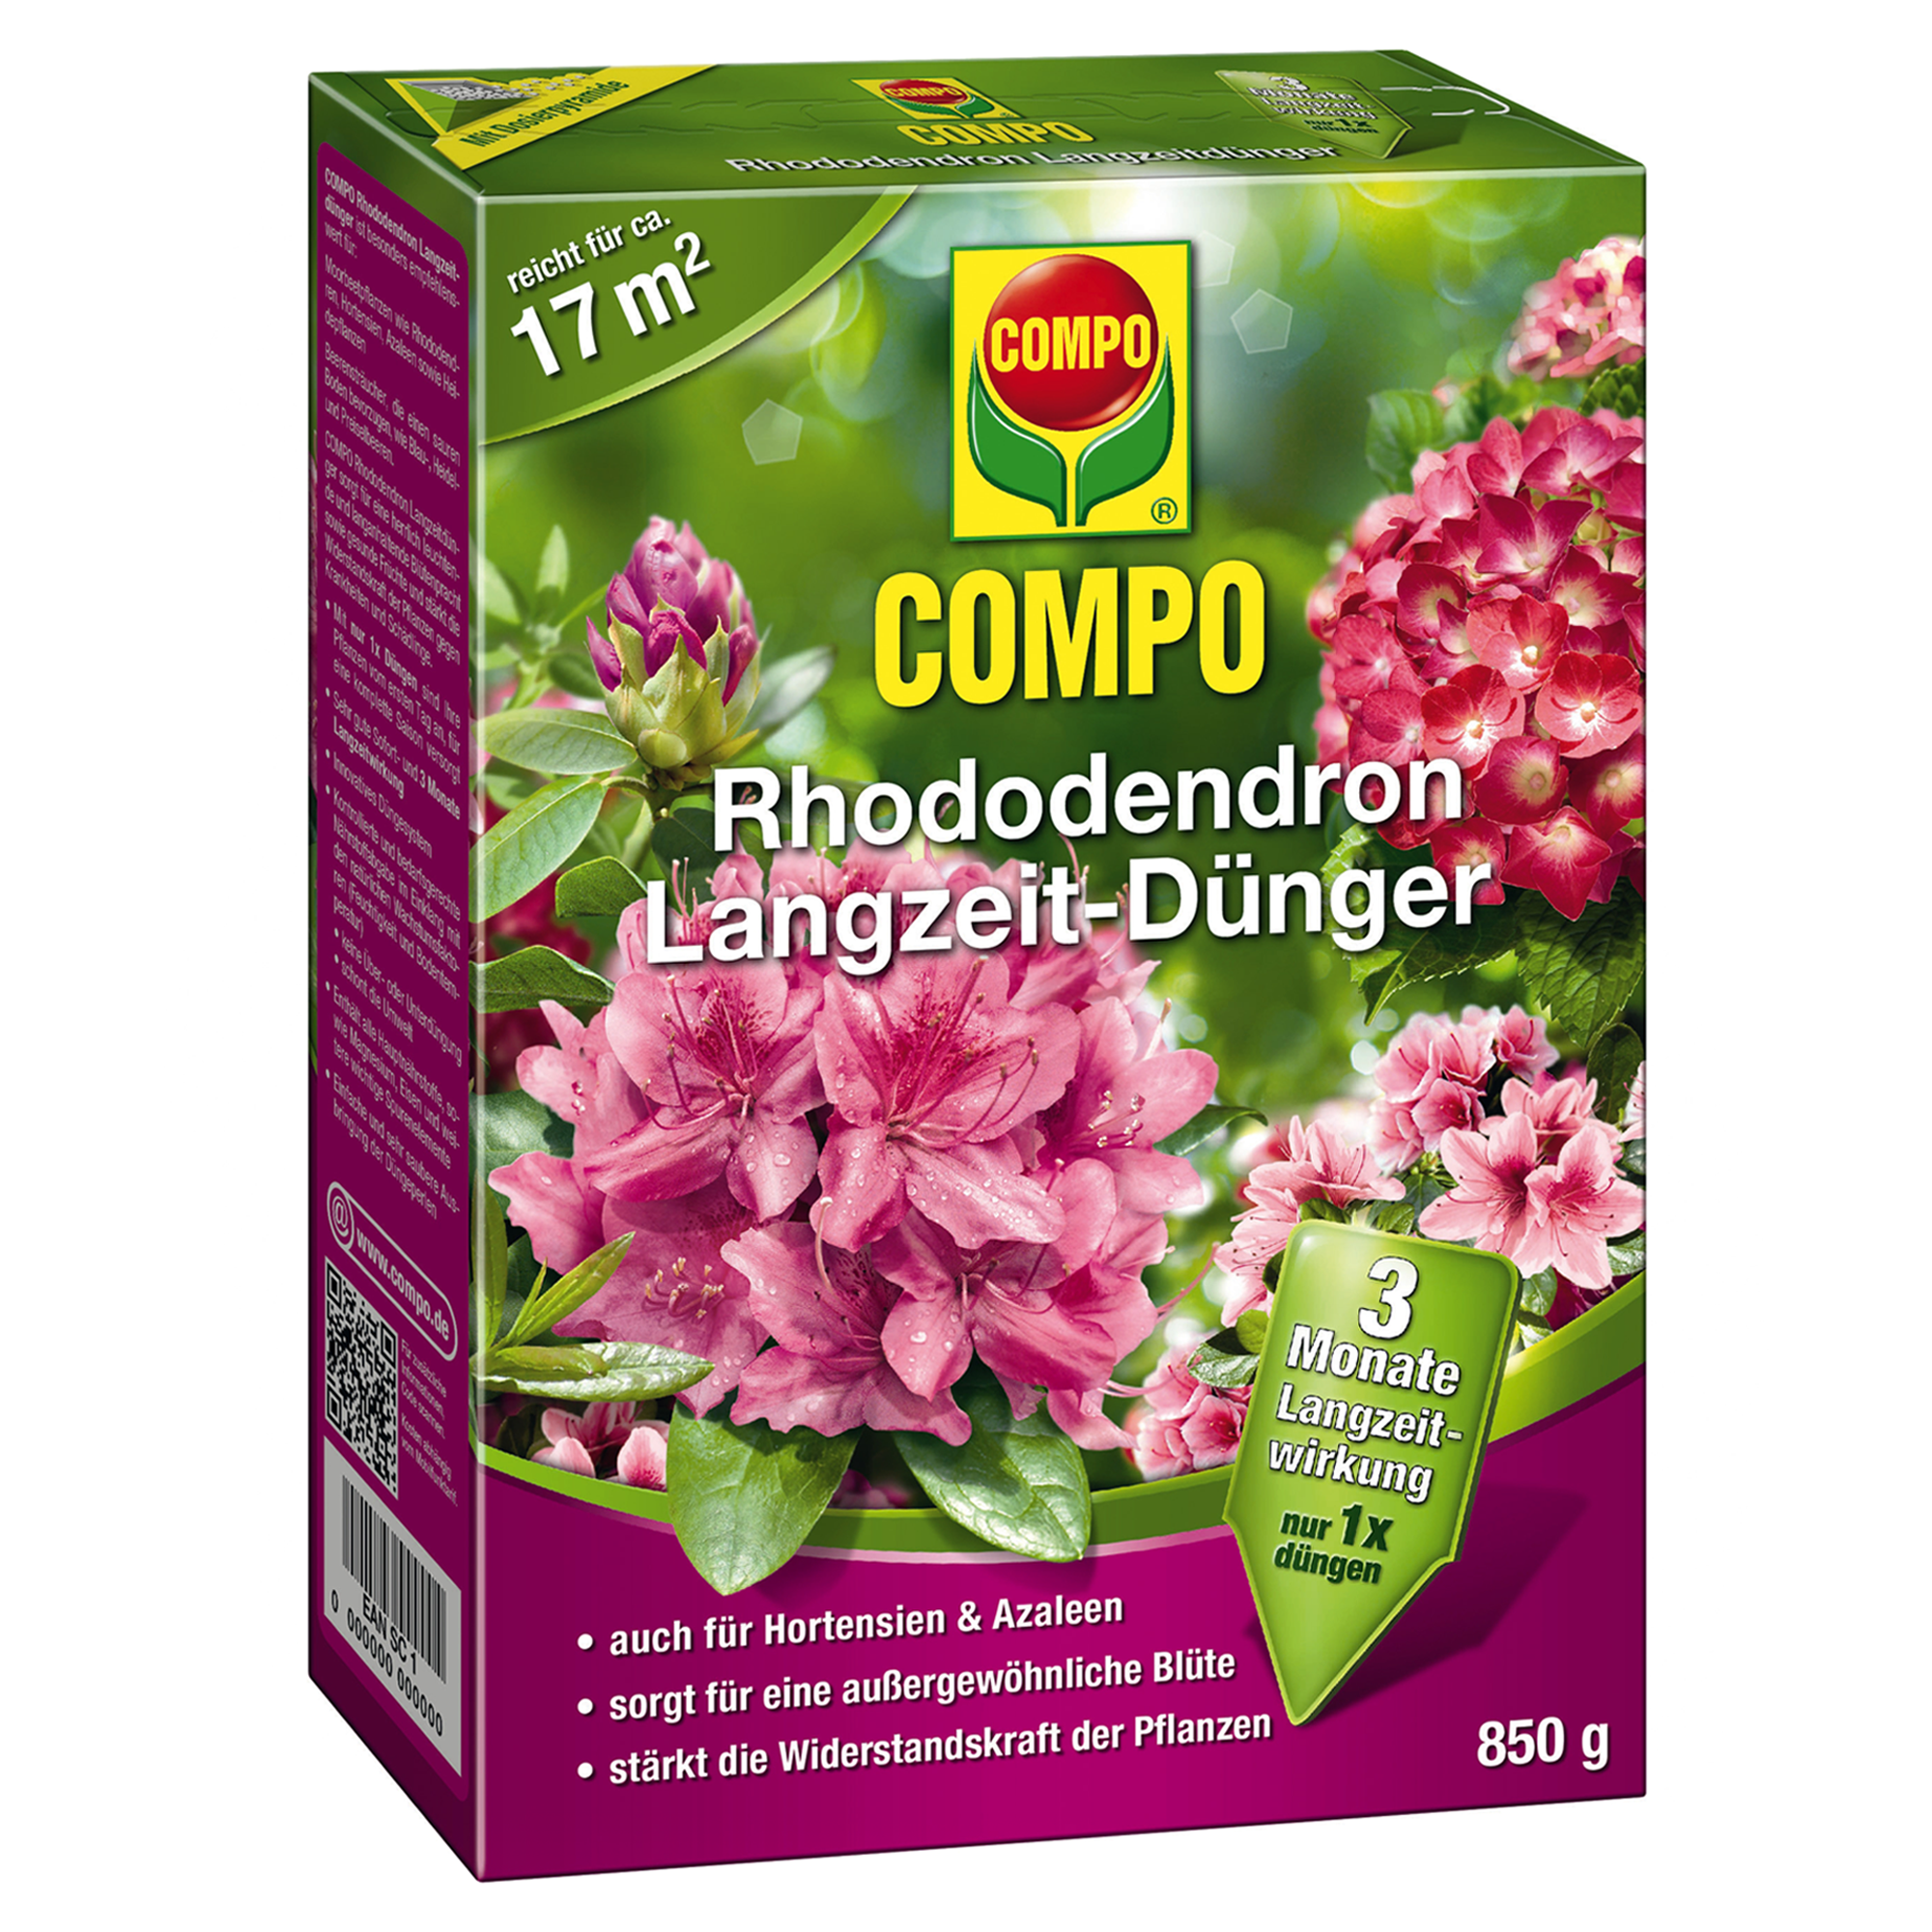 Rhododendron-Langzeitdünger 0,85 kg + product picture